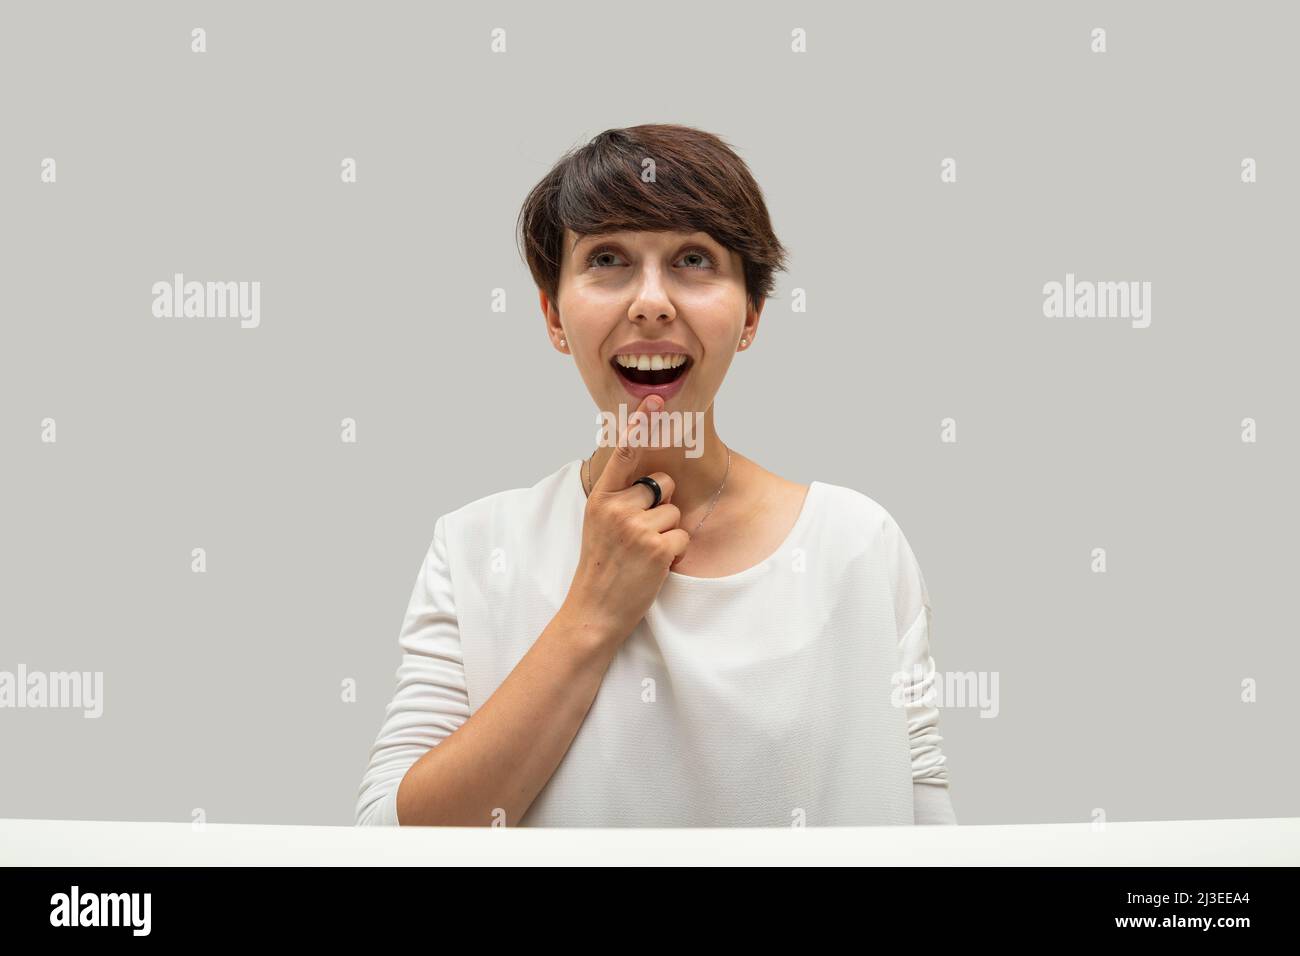 Silly and funny expression of a woman who has a great idea or solution to a problem. Funny and witty representation of the concept of imagination and Stock Photo